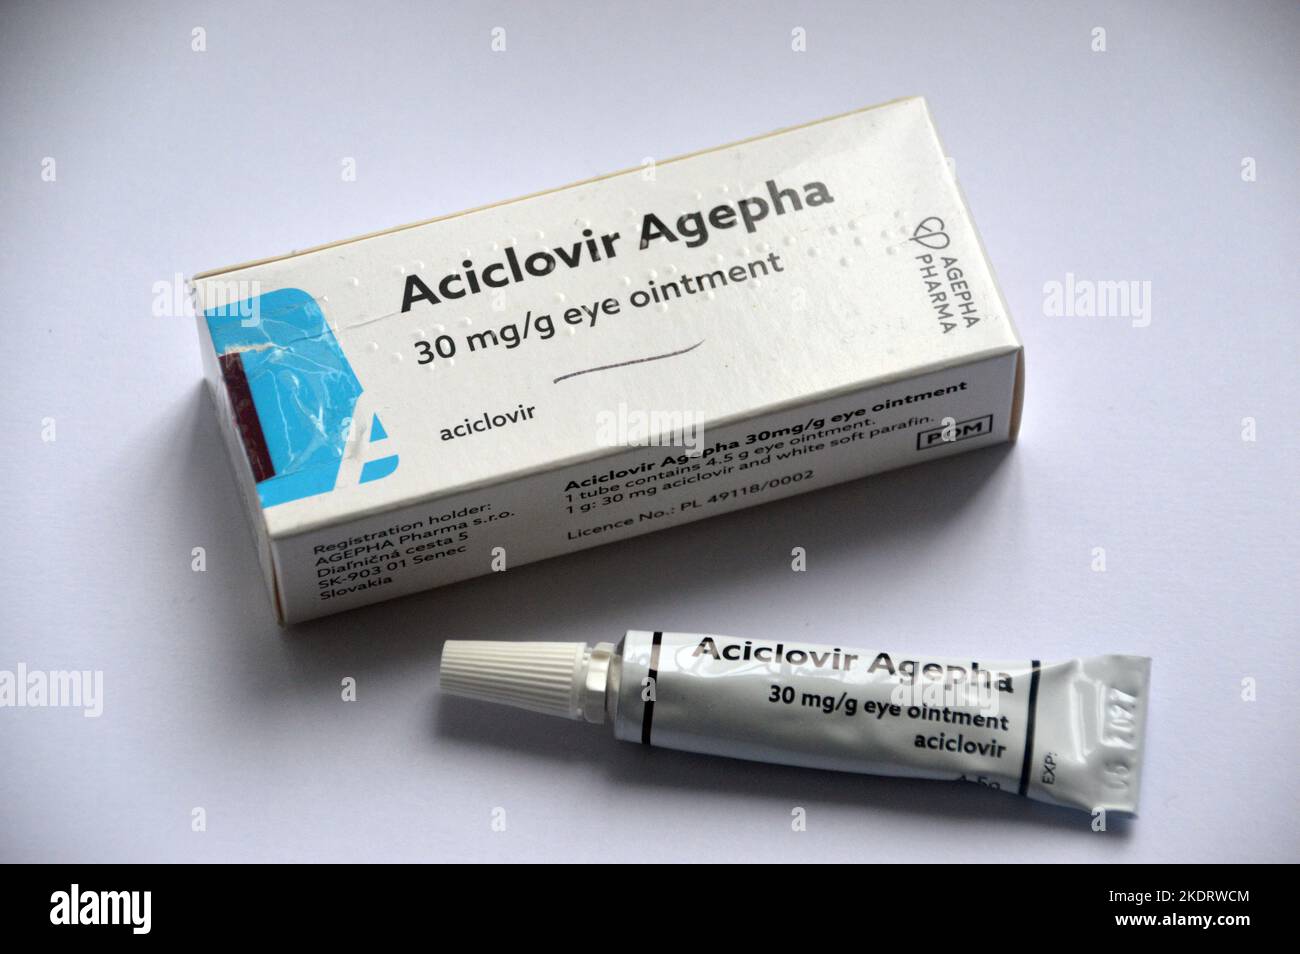 Aciclovir Agepha Eye Ointment made by Agepha Pharma an Antiviral Medication Prescribed for Herpes Simplex Virus Infections, (Chickenpox & Shingles) Stock Photo